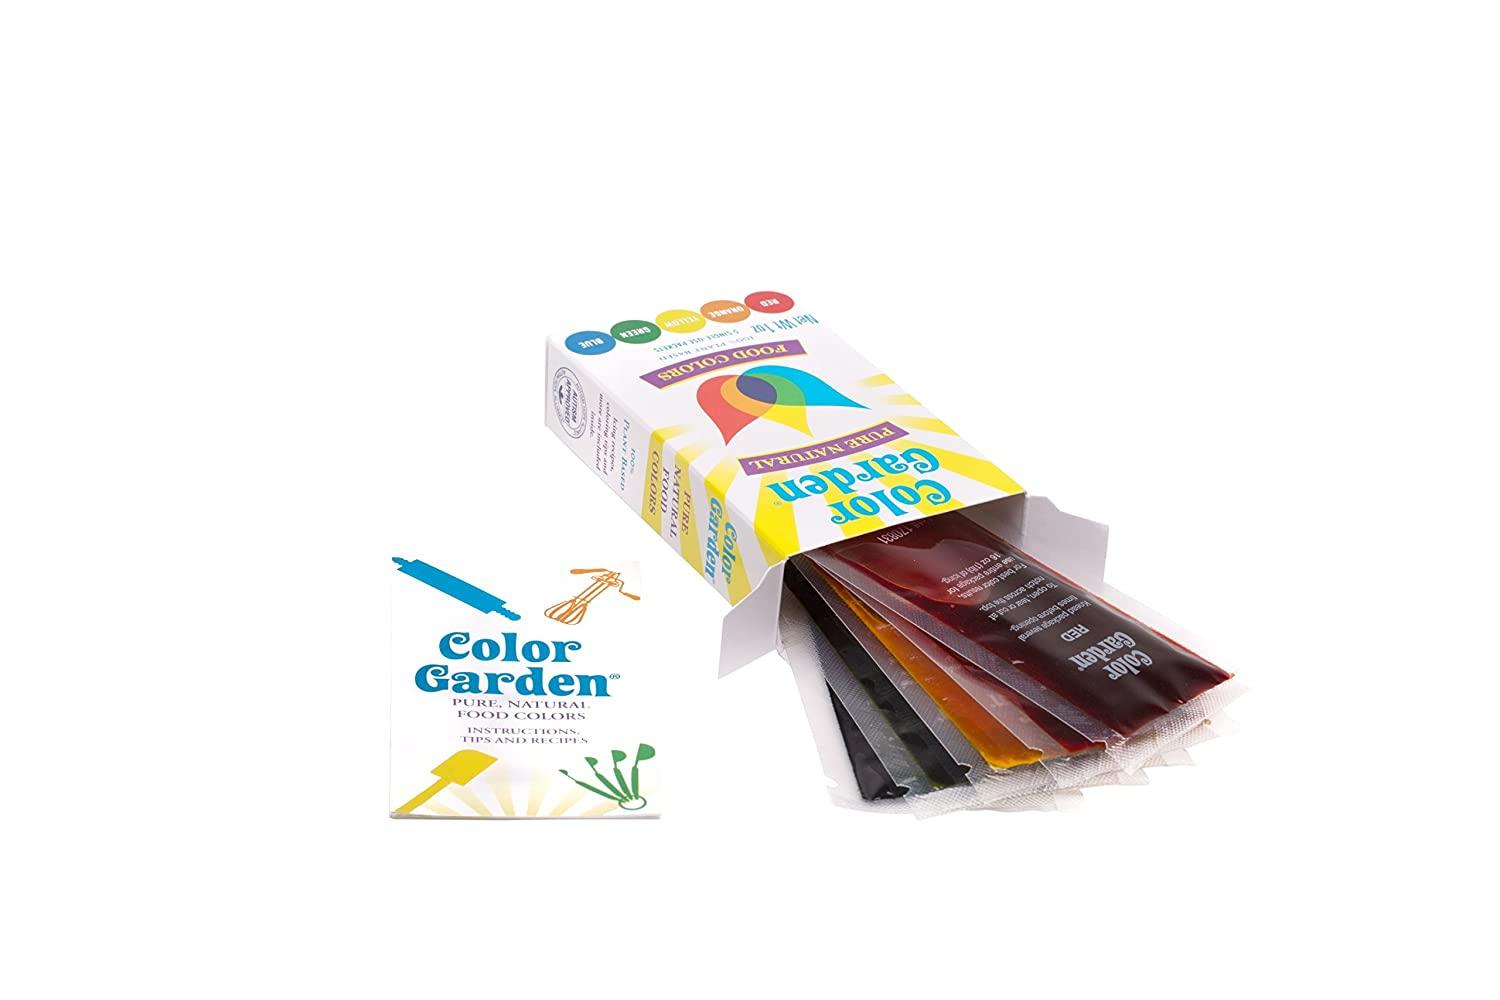  Color Garden Pure Natural Food Colors, Multi Pack 5